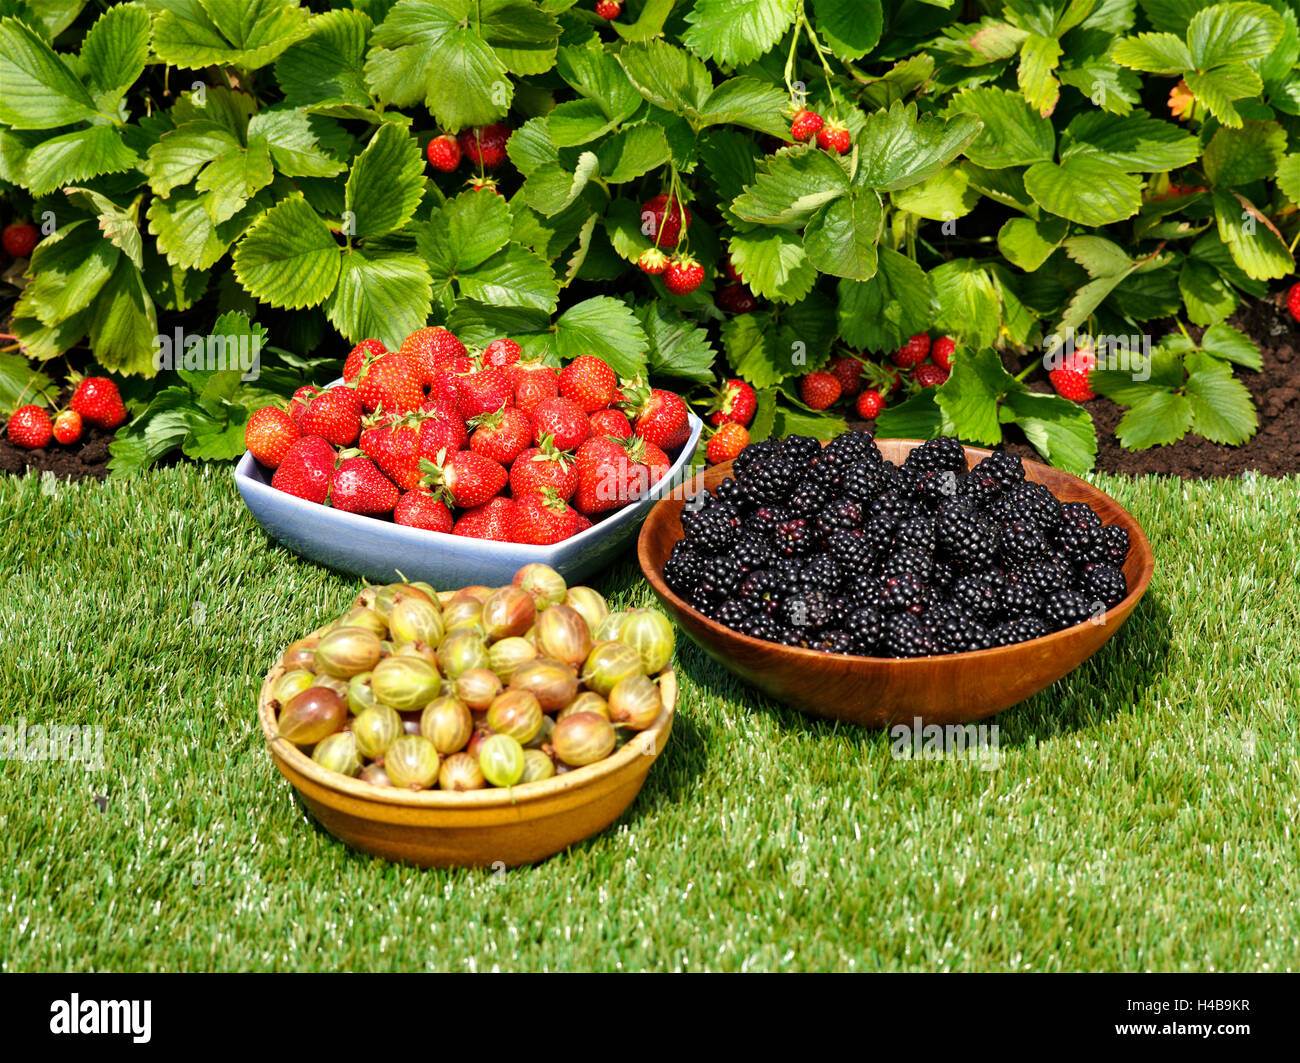 Berries in bowls, garden, lawn, strawberry patch Stock Photo